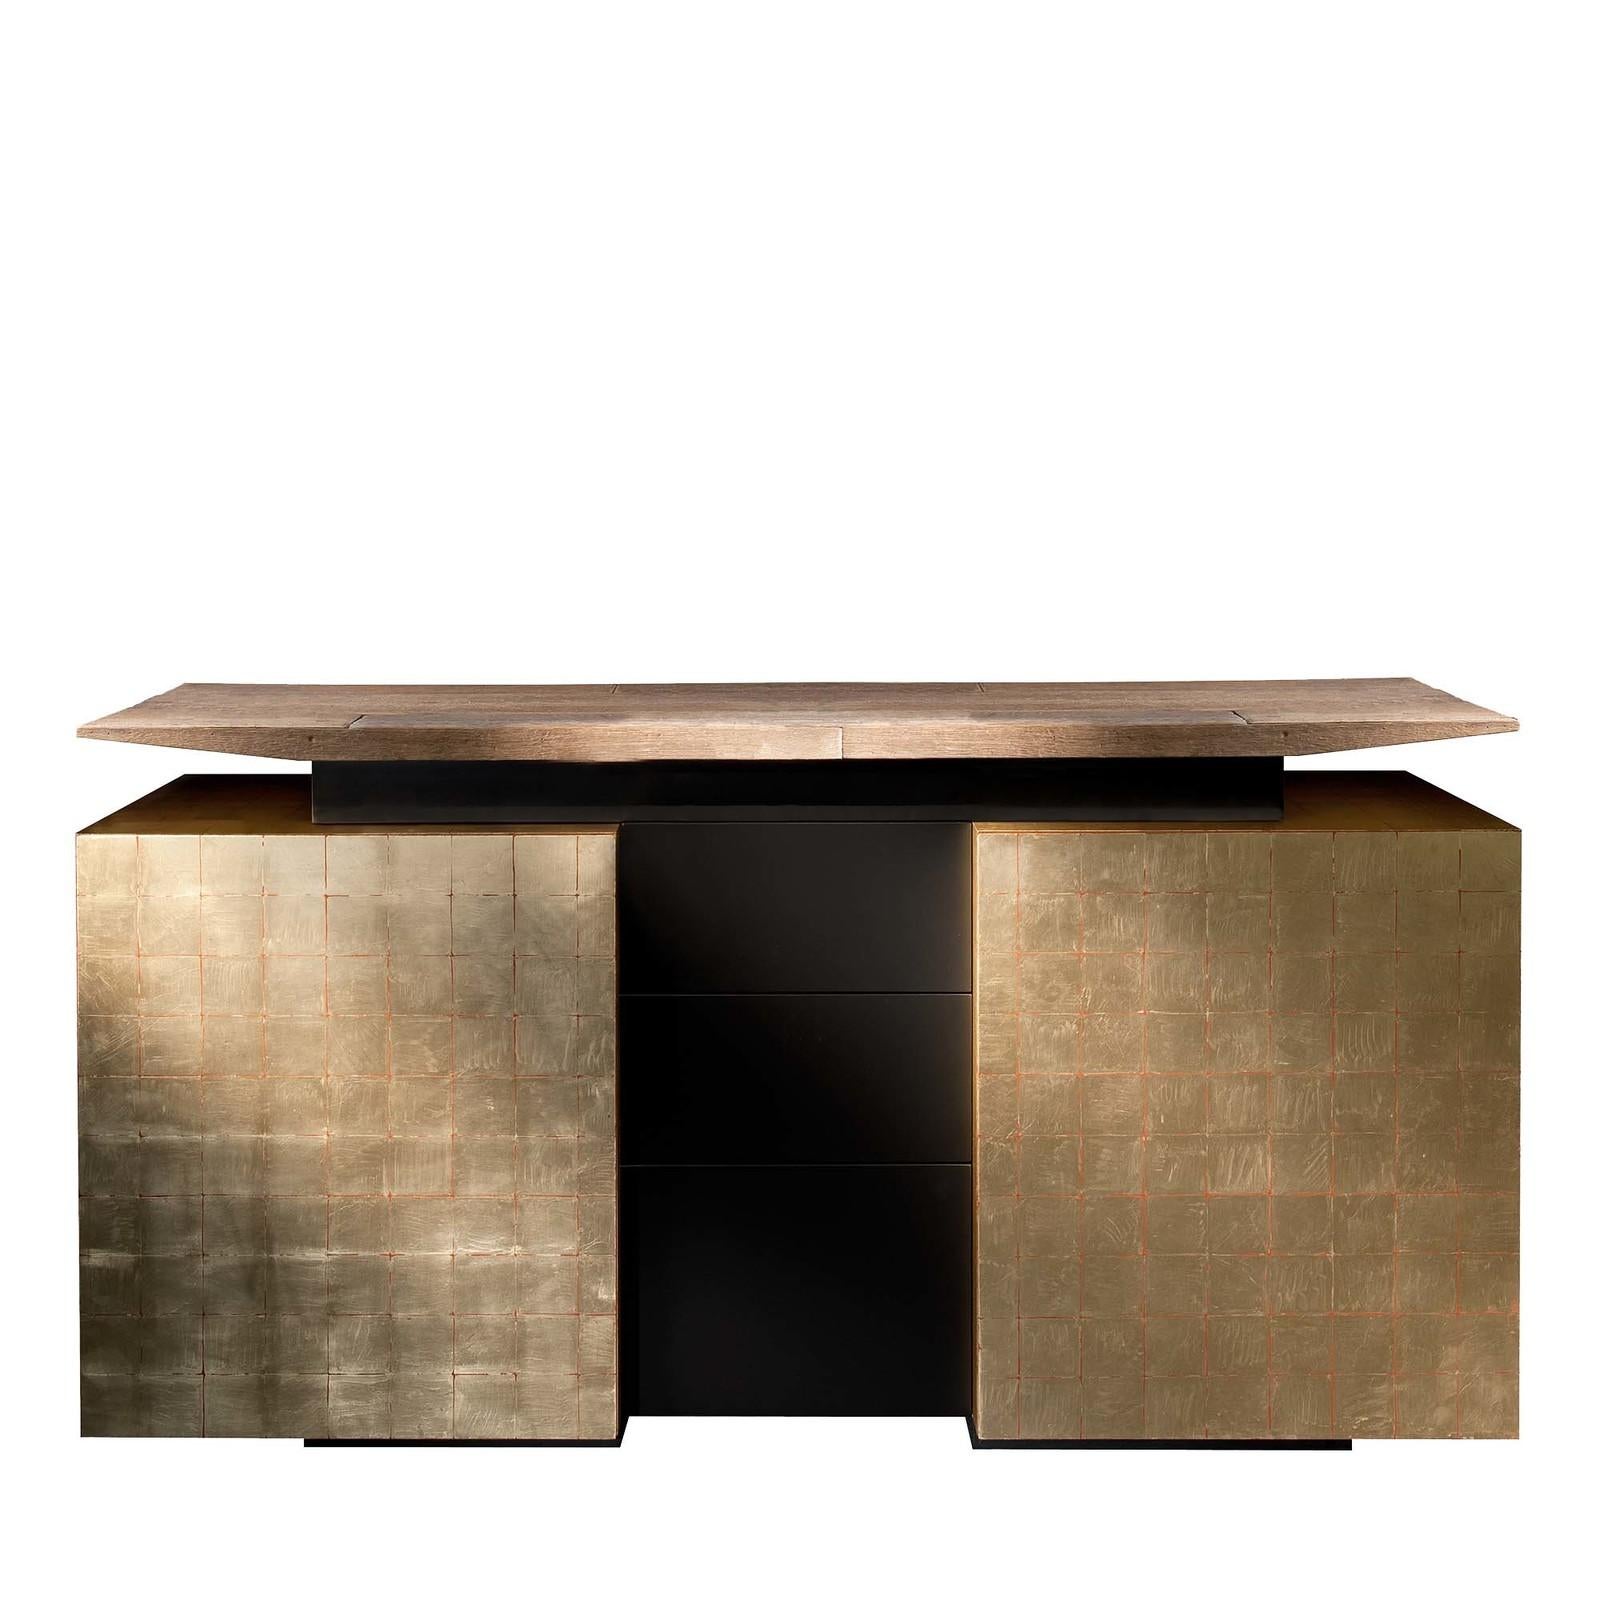 Pairing function with style, this superb cabinet offers room to stage and store entertaining essentials. The design boasts clean lines in a harmonious combination of textures. Floating from the structure below finished in gold leaf, the top is